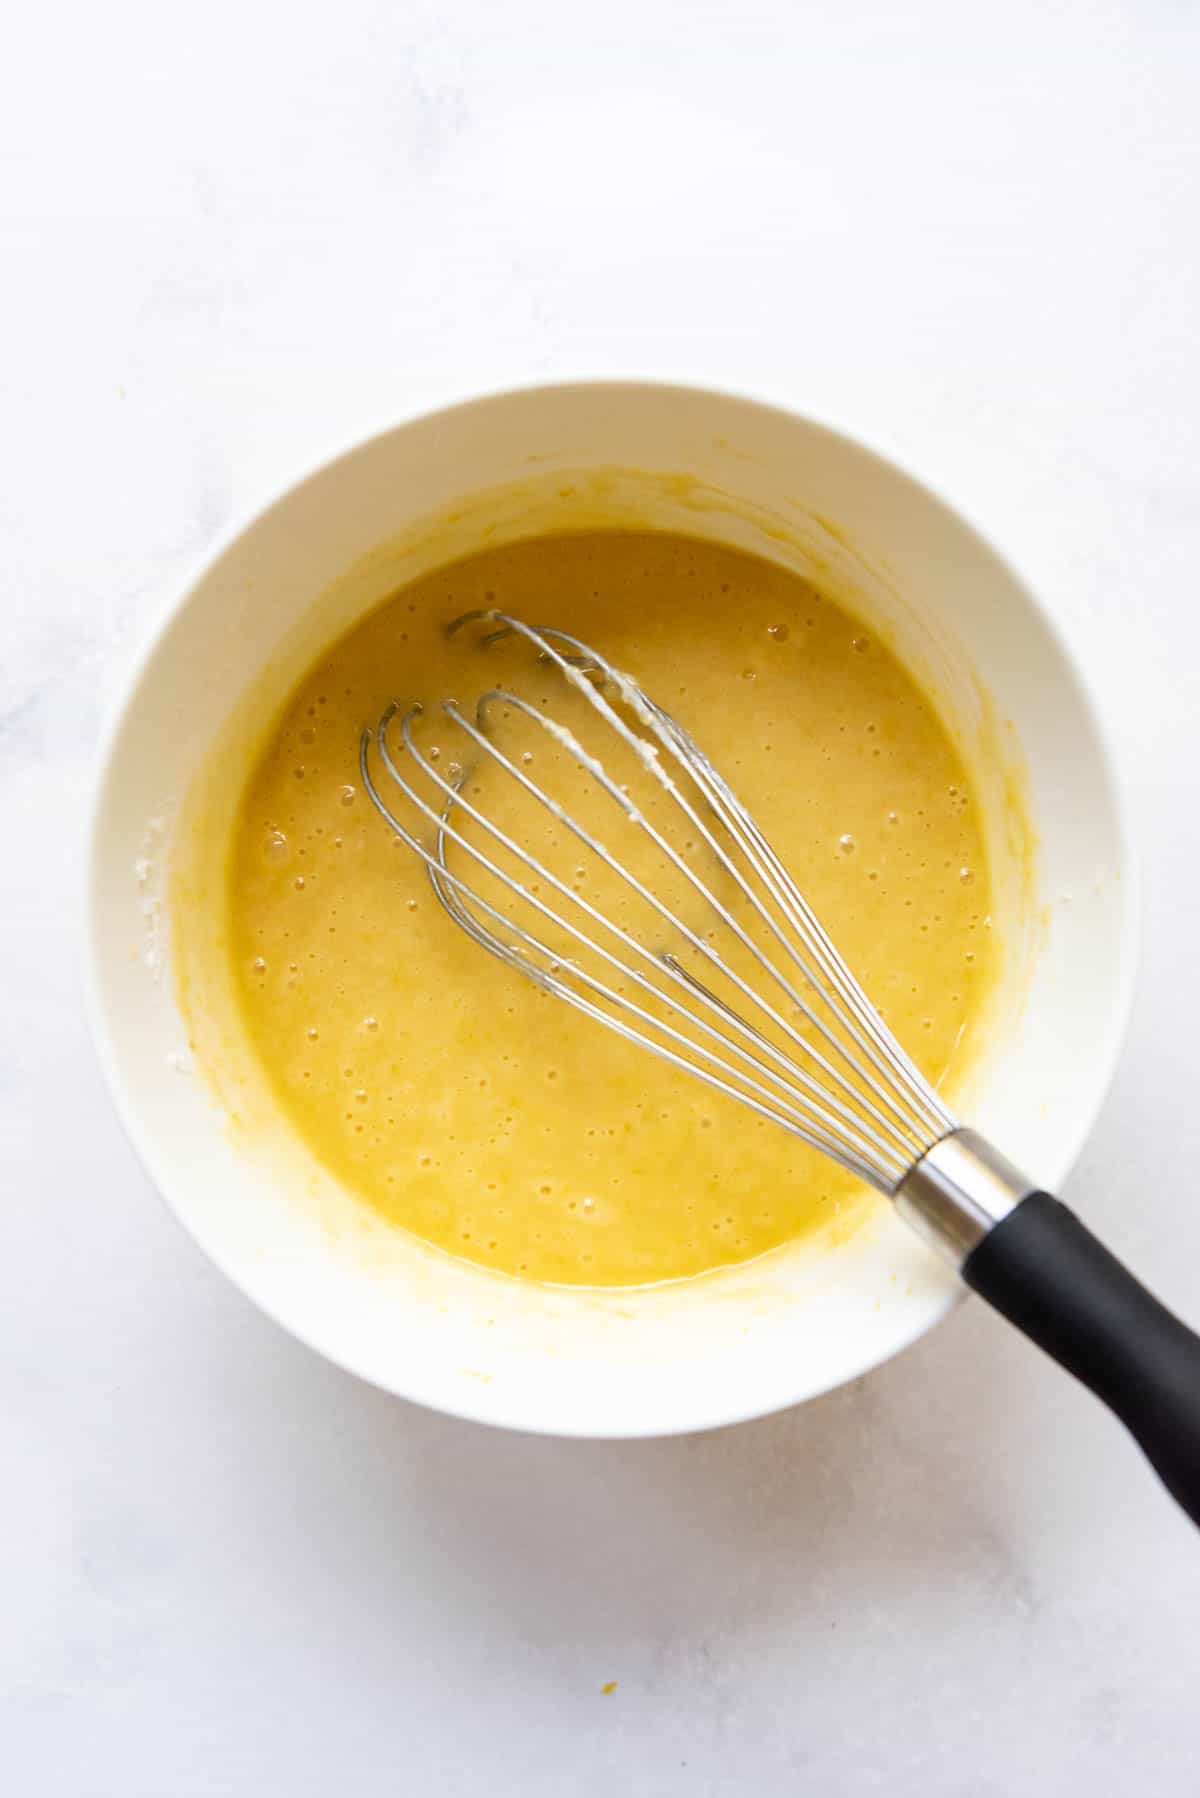 Lemon brownie batter in a mixing bowl with a whisk.